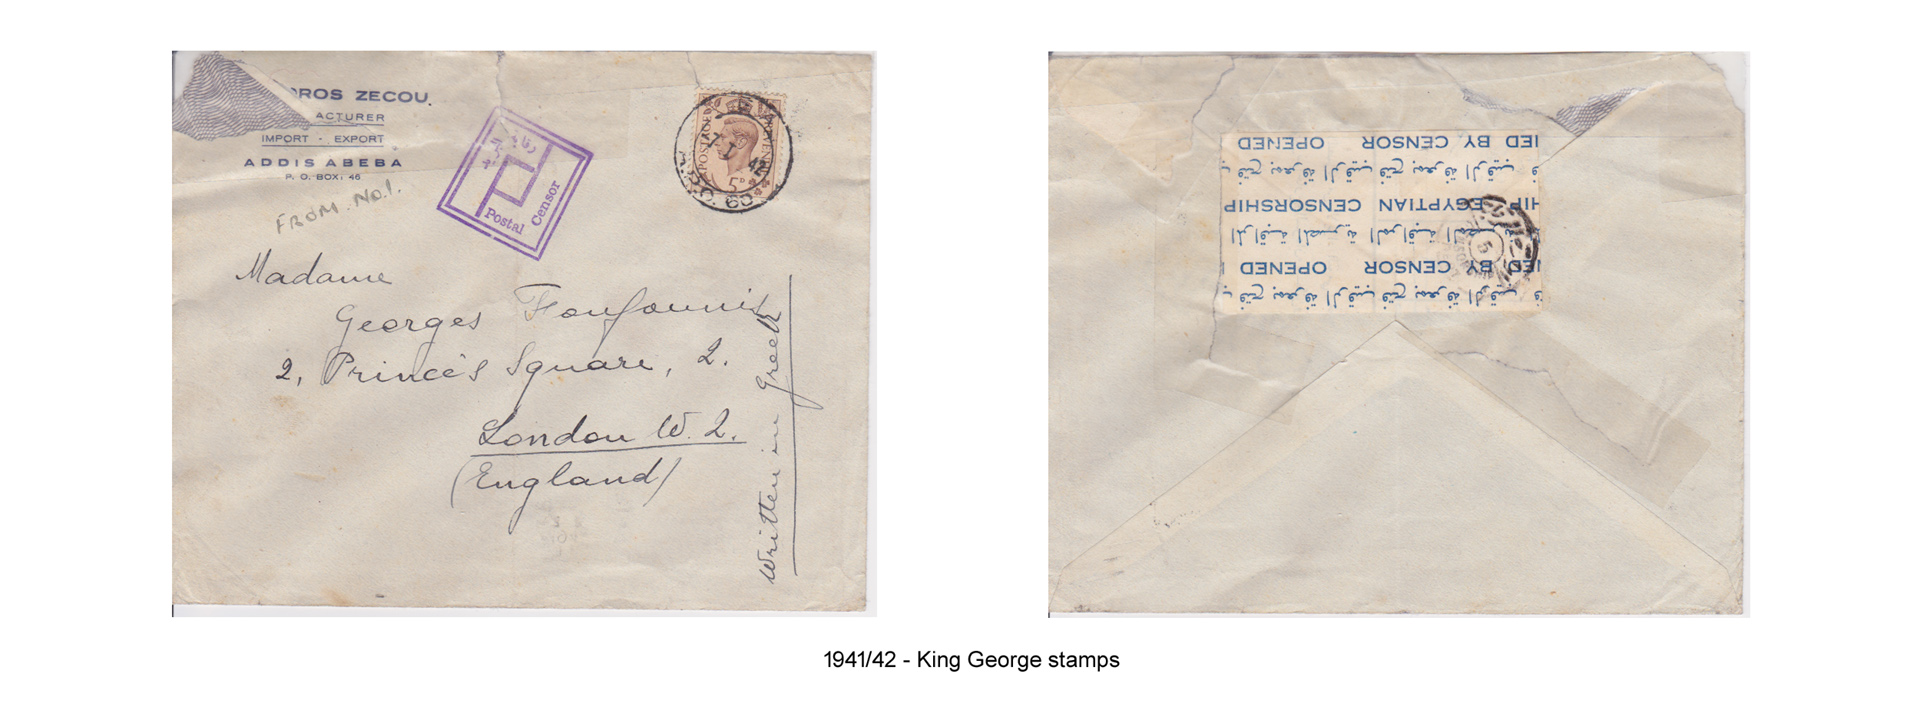 1941-42 - King George stamps